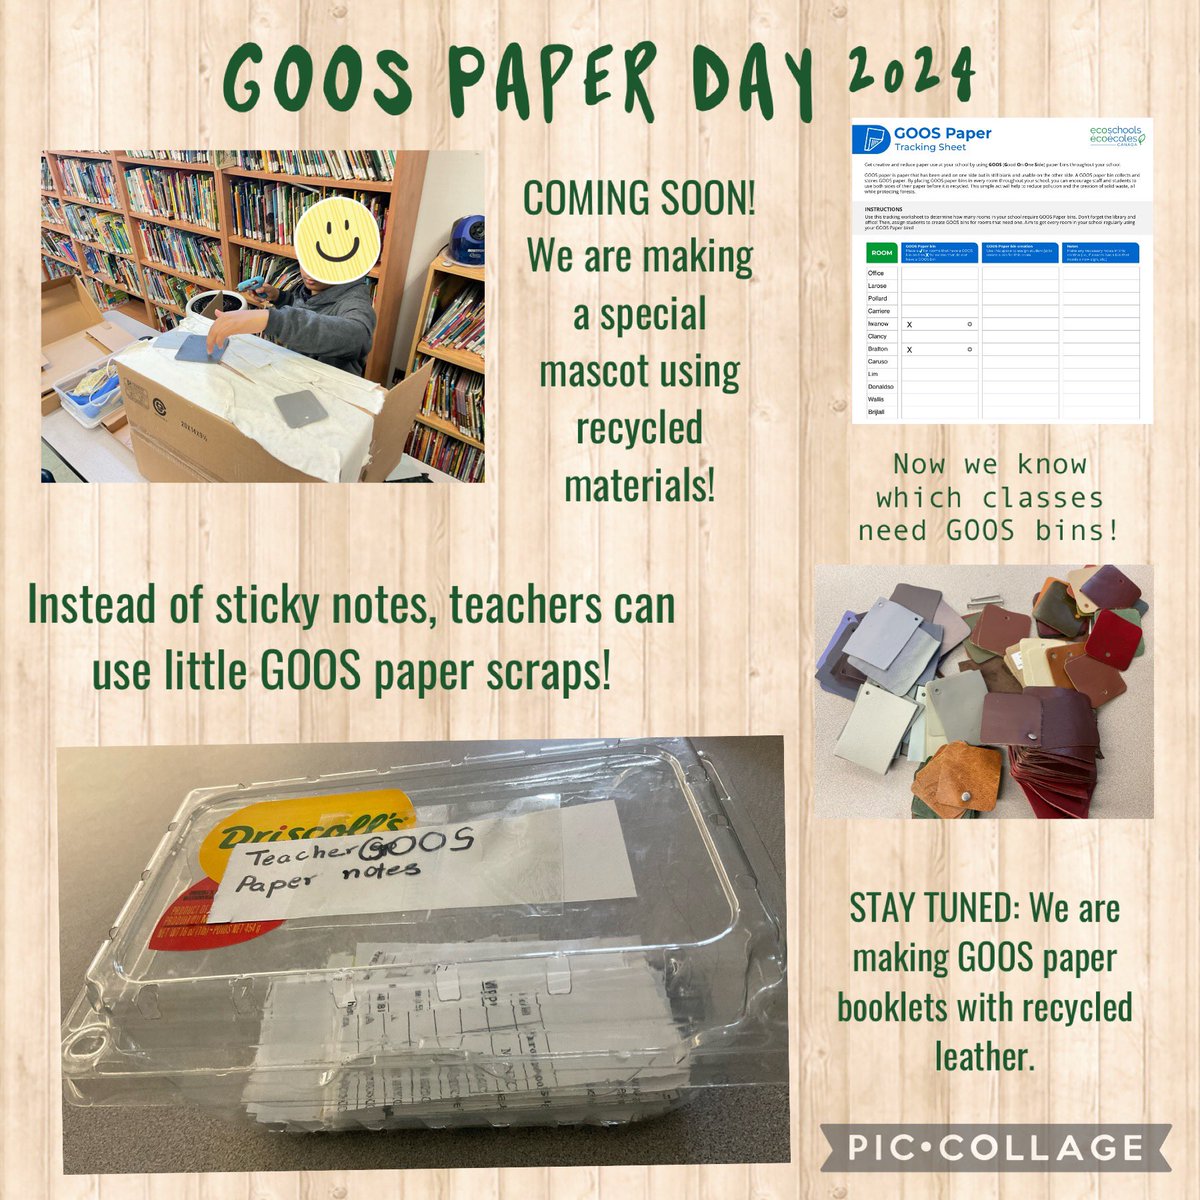 We are continuing to get better at making sure our school knows about GOOS paper! #GOOSPaperDay @WoburnEco @WoburnJunior @EcoSchoolsCAN @EcoSchoolsTDSB